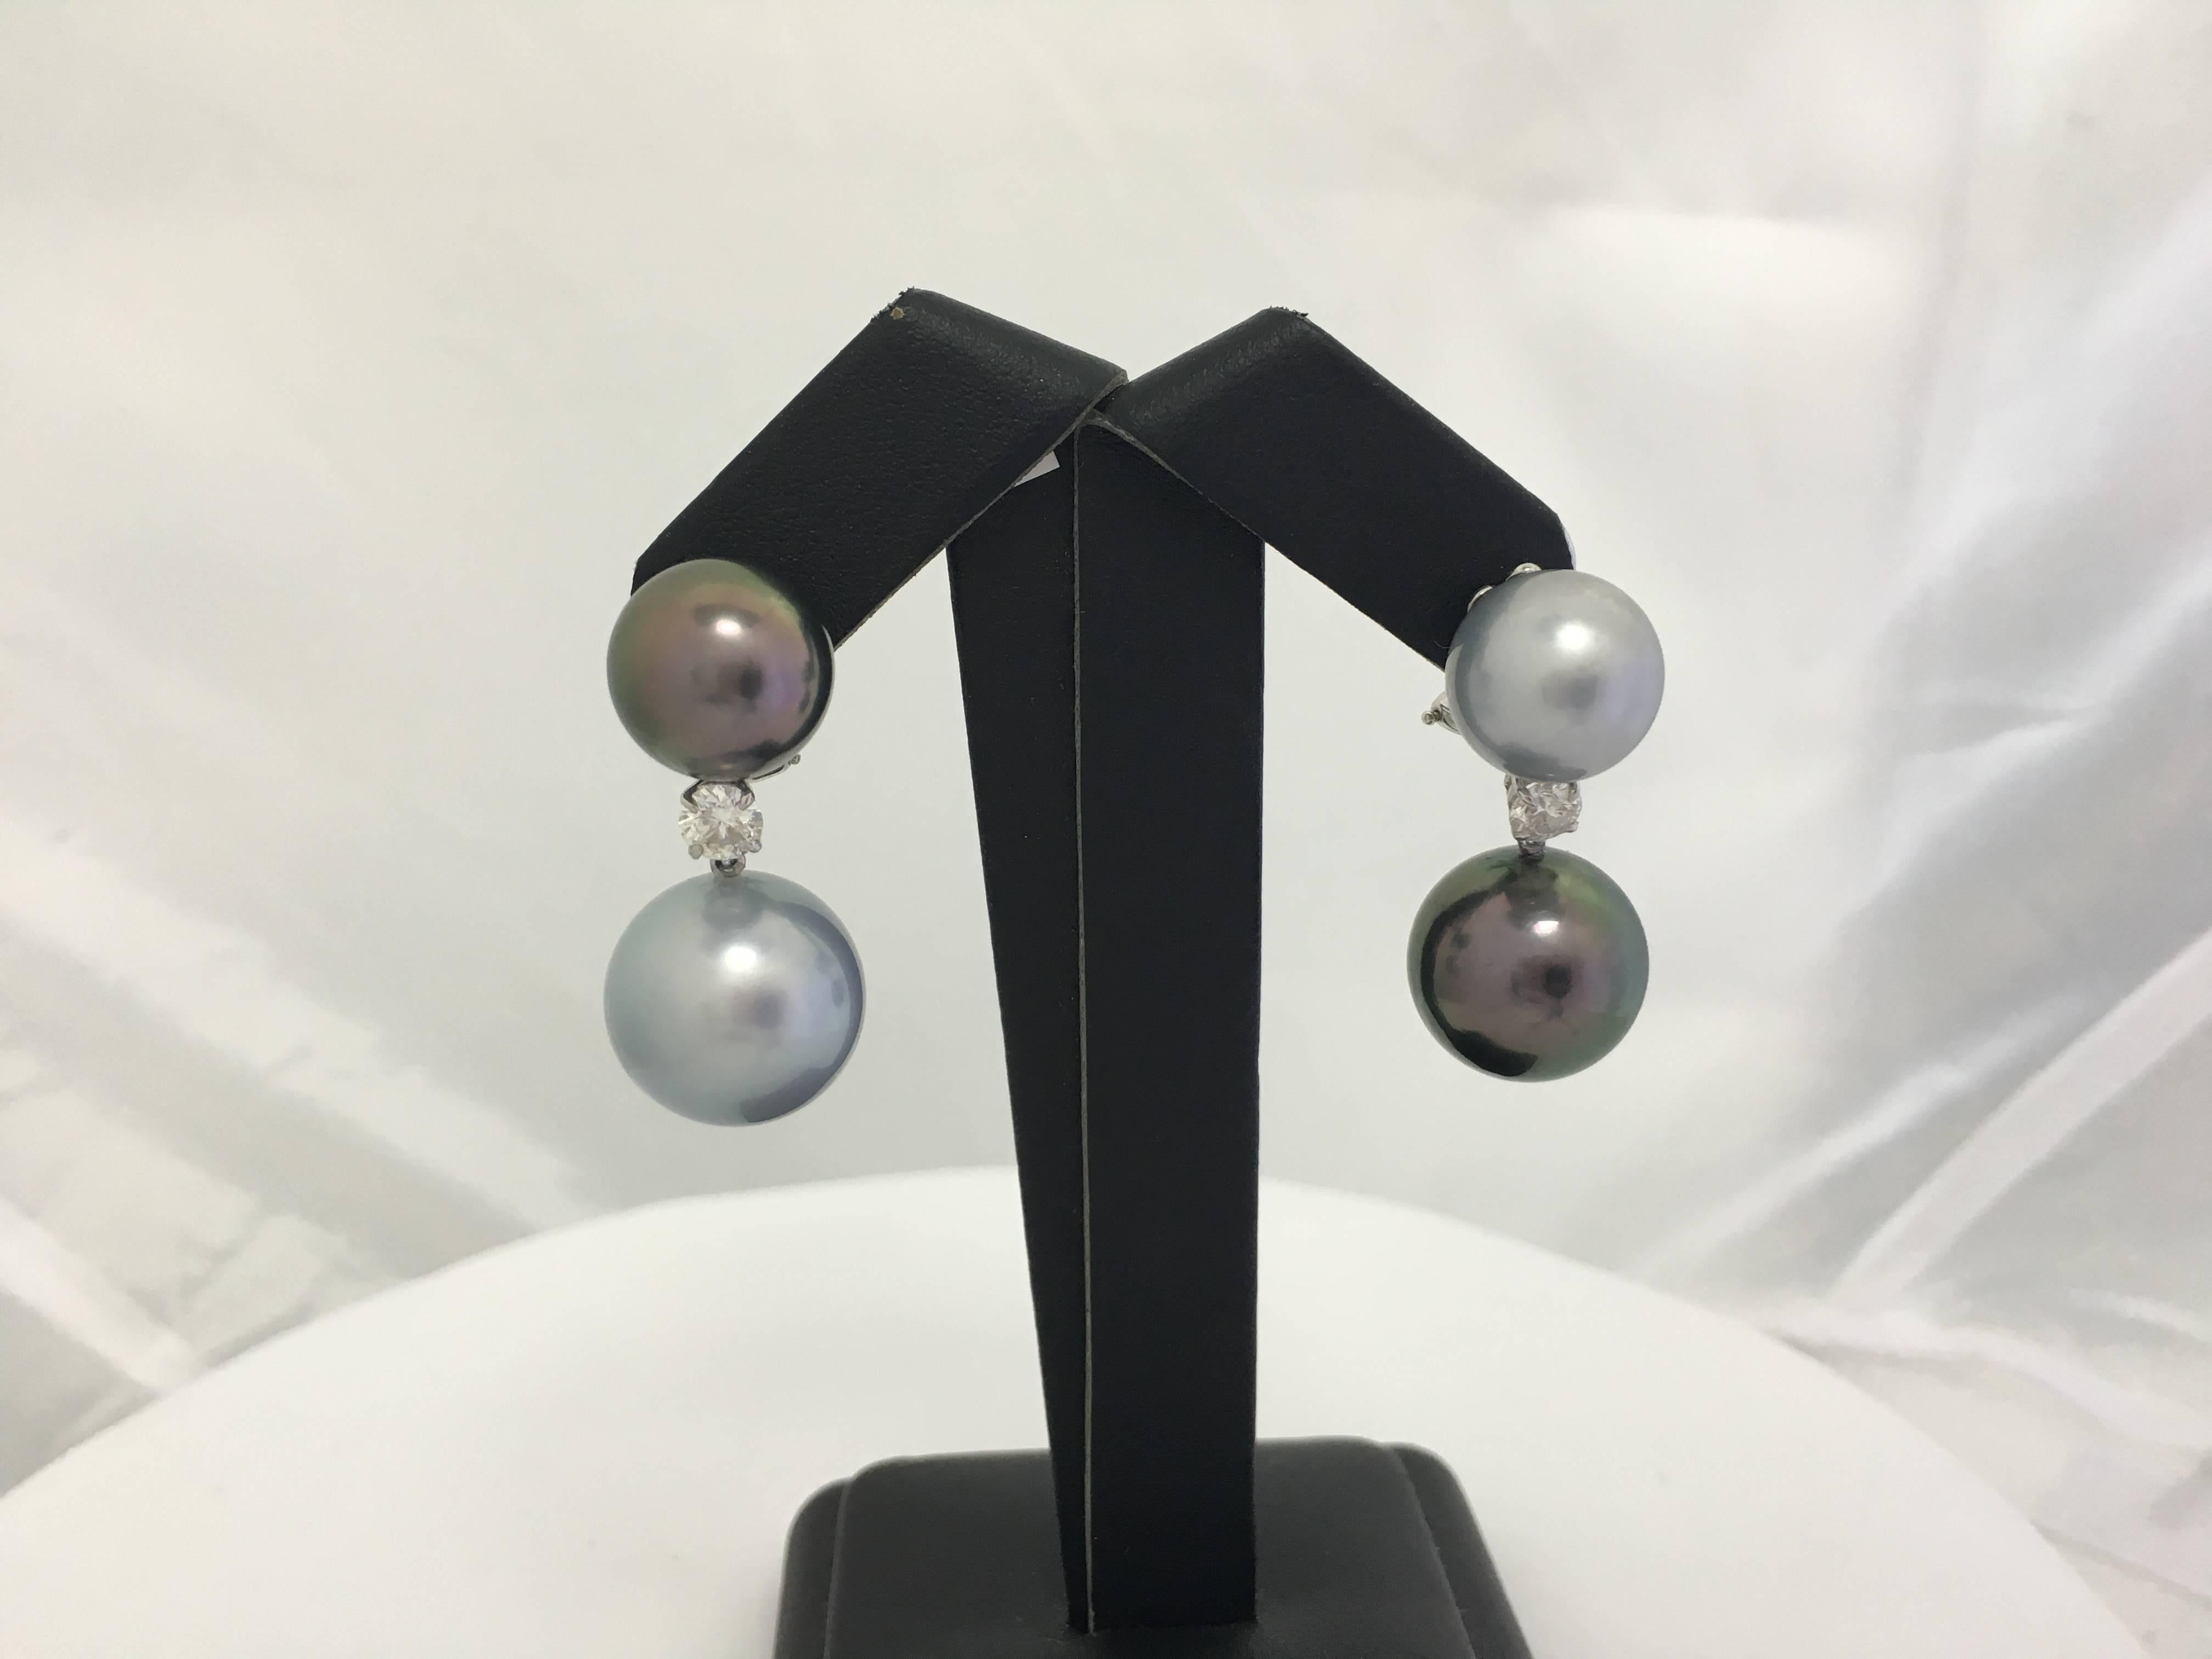 18K White Gold Earring
0.60 Cts Diamond
12-14 mm Pearl size
Tahitian Pearls
Pearl Quality : AA
Pearl luster: AA